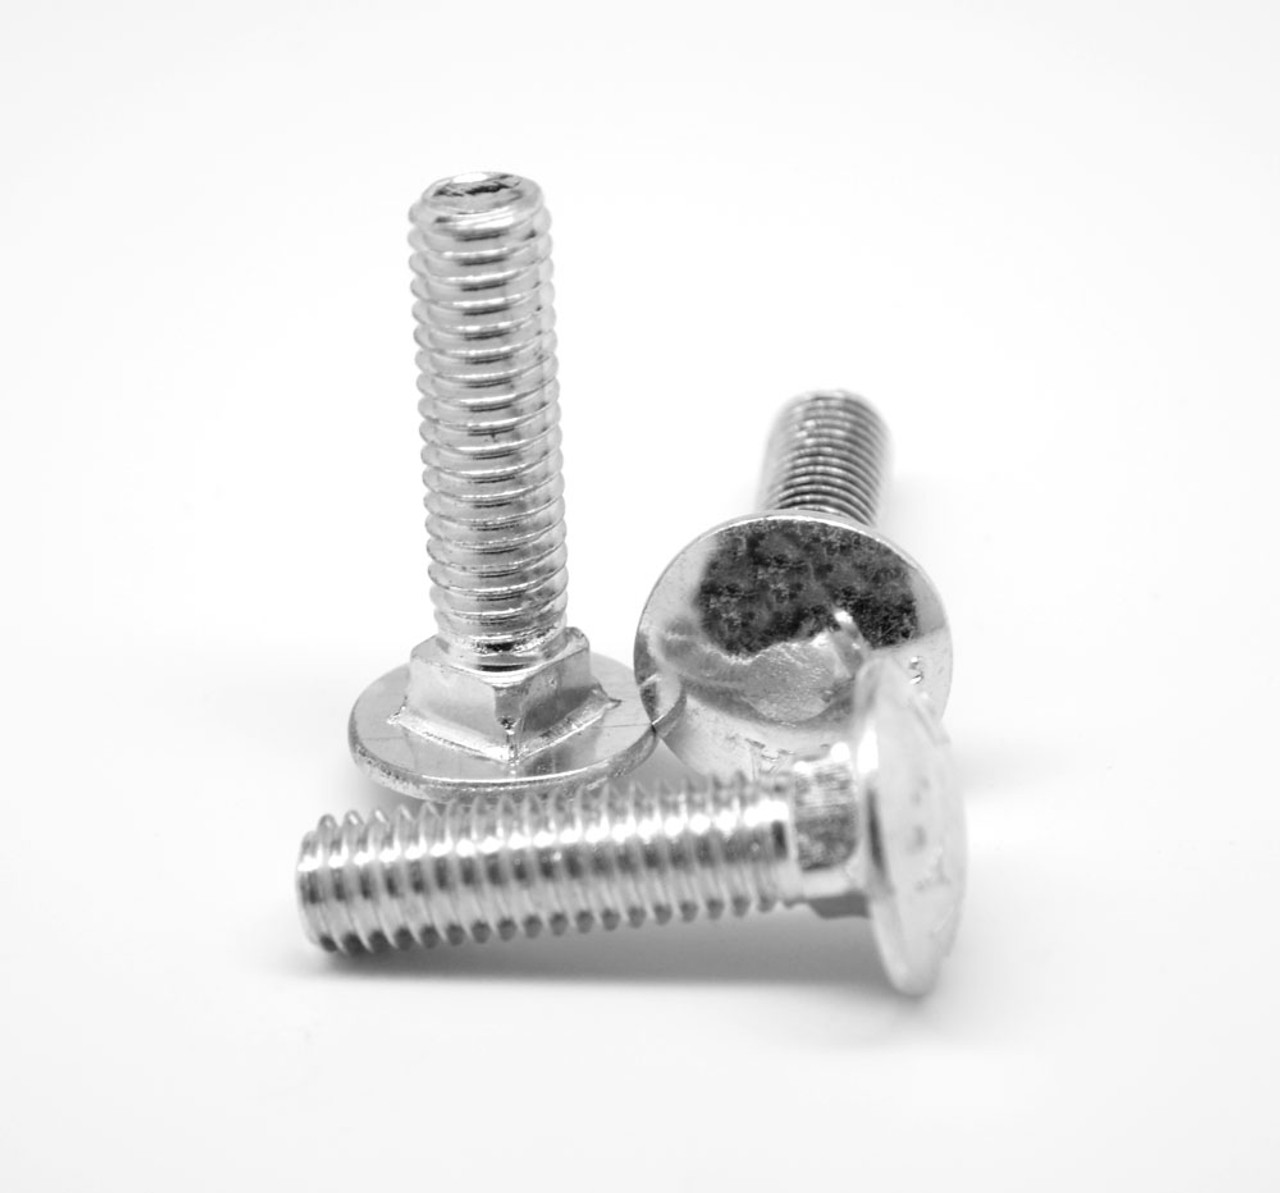 5/16"-18 x 5/8" (FT) Coarse Thread A307 Grade A Carriage Bolt Low Carbon Steel Zinc Plated